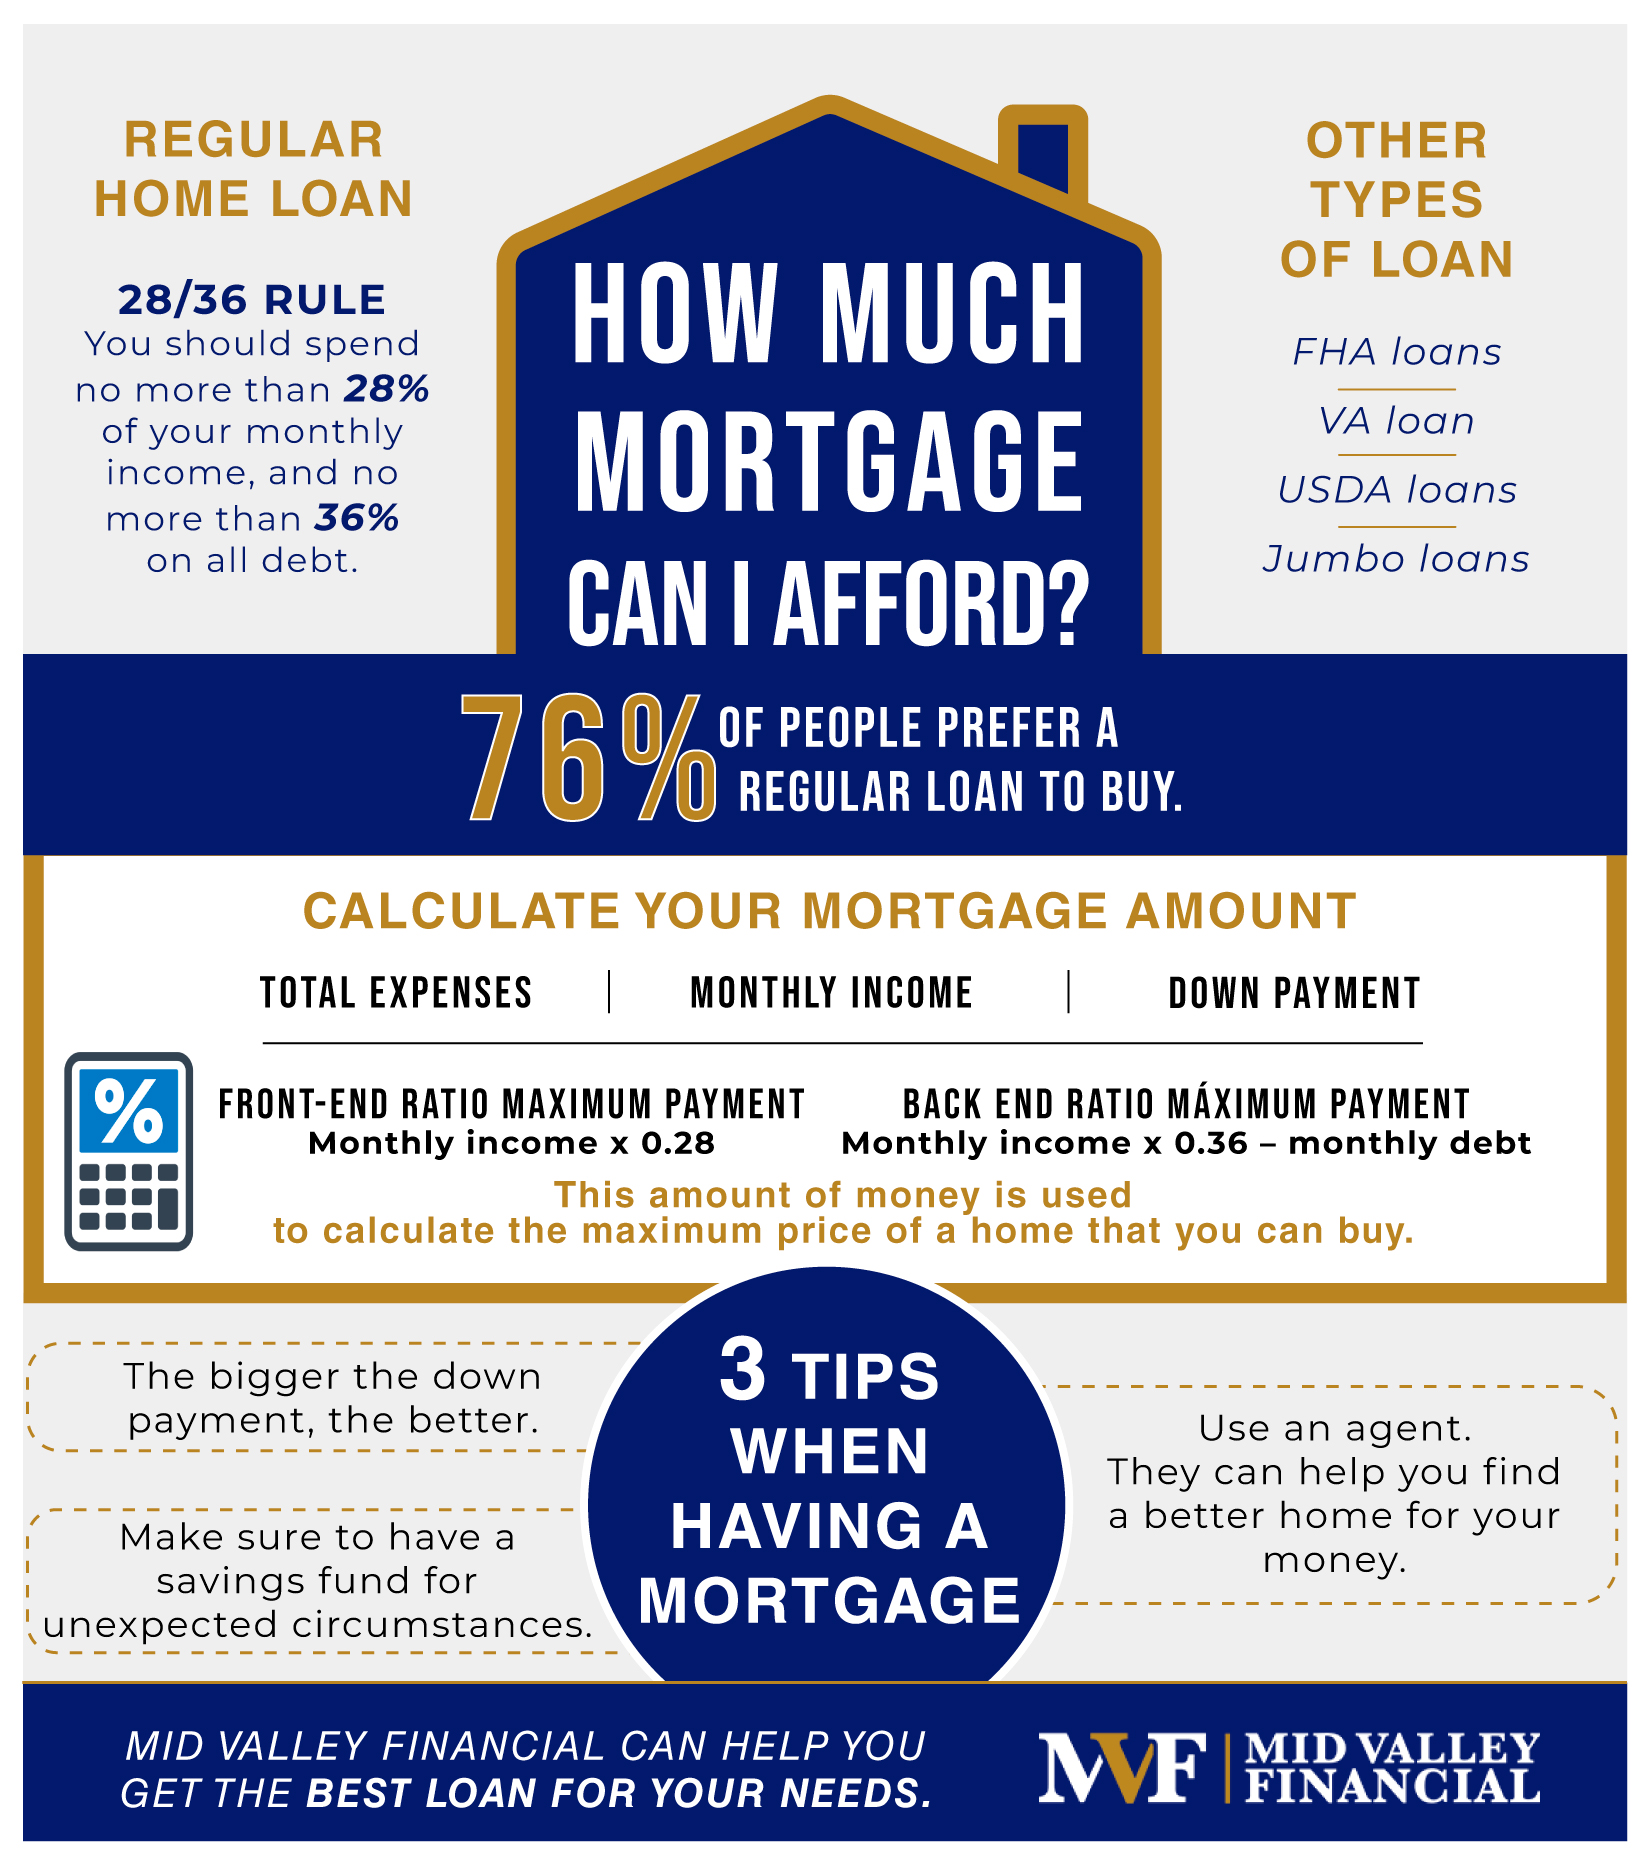 How much mortgage can I afford?